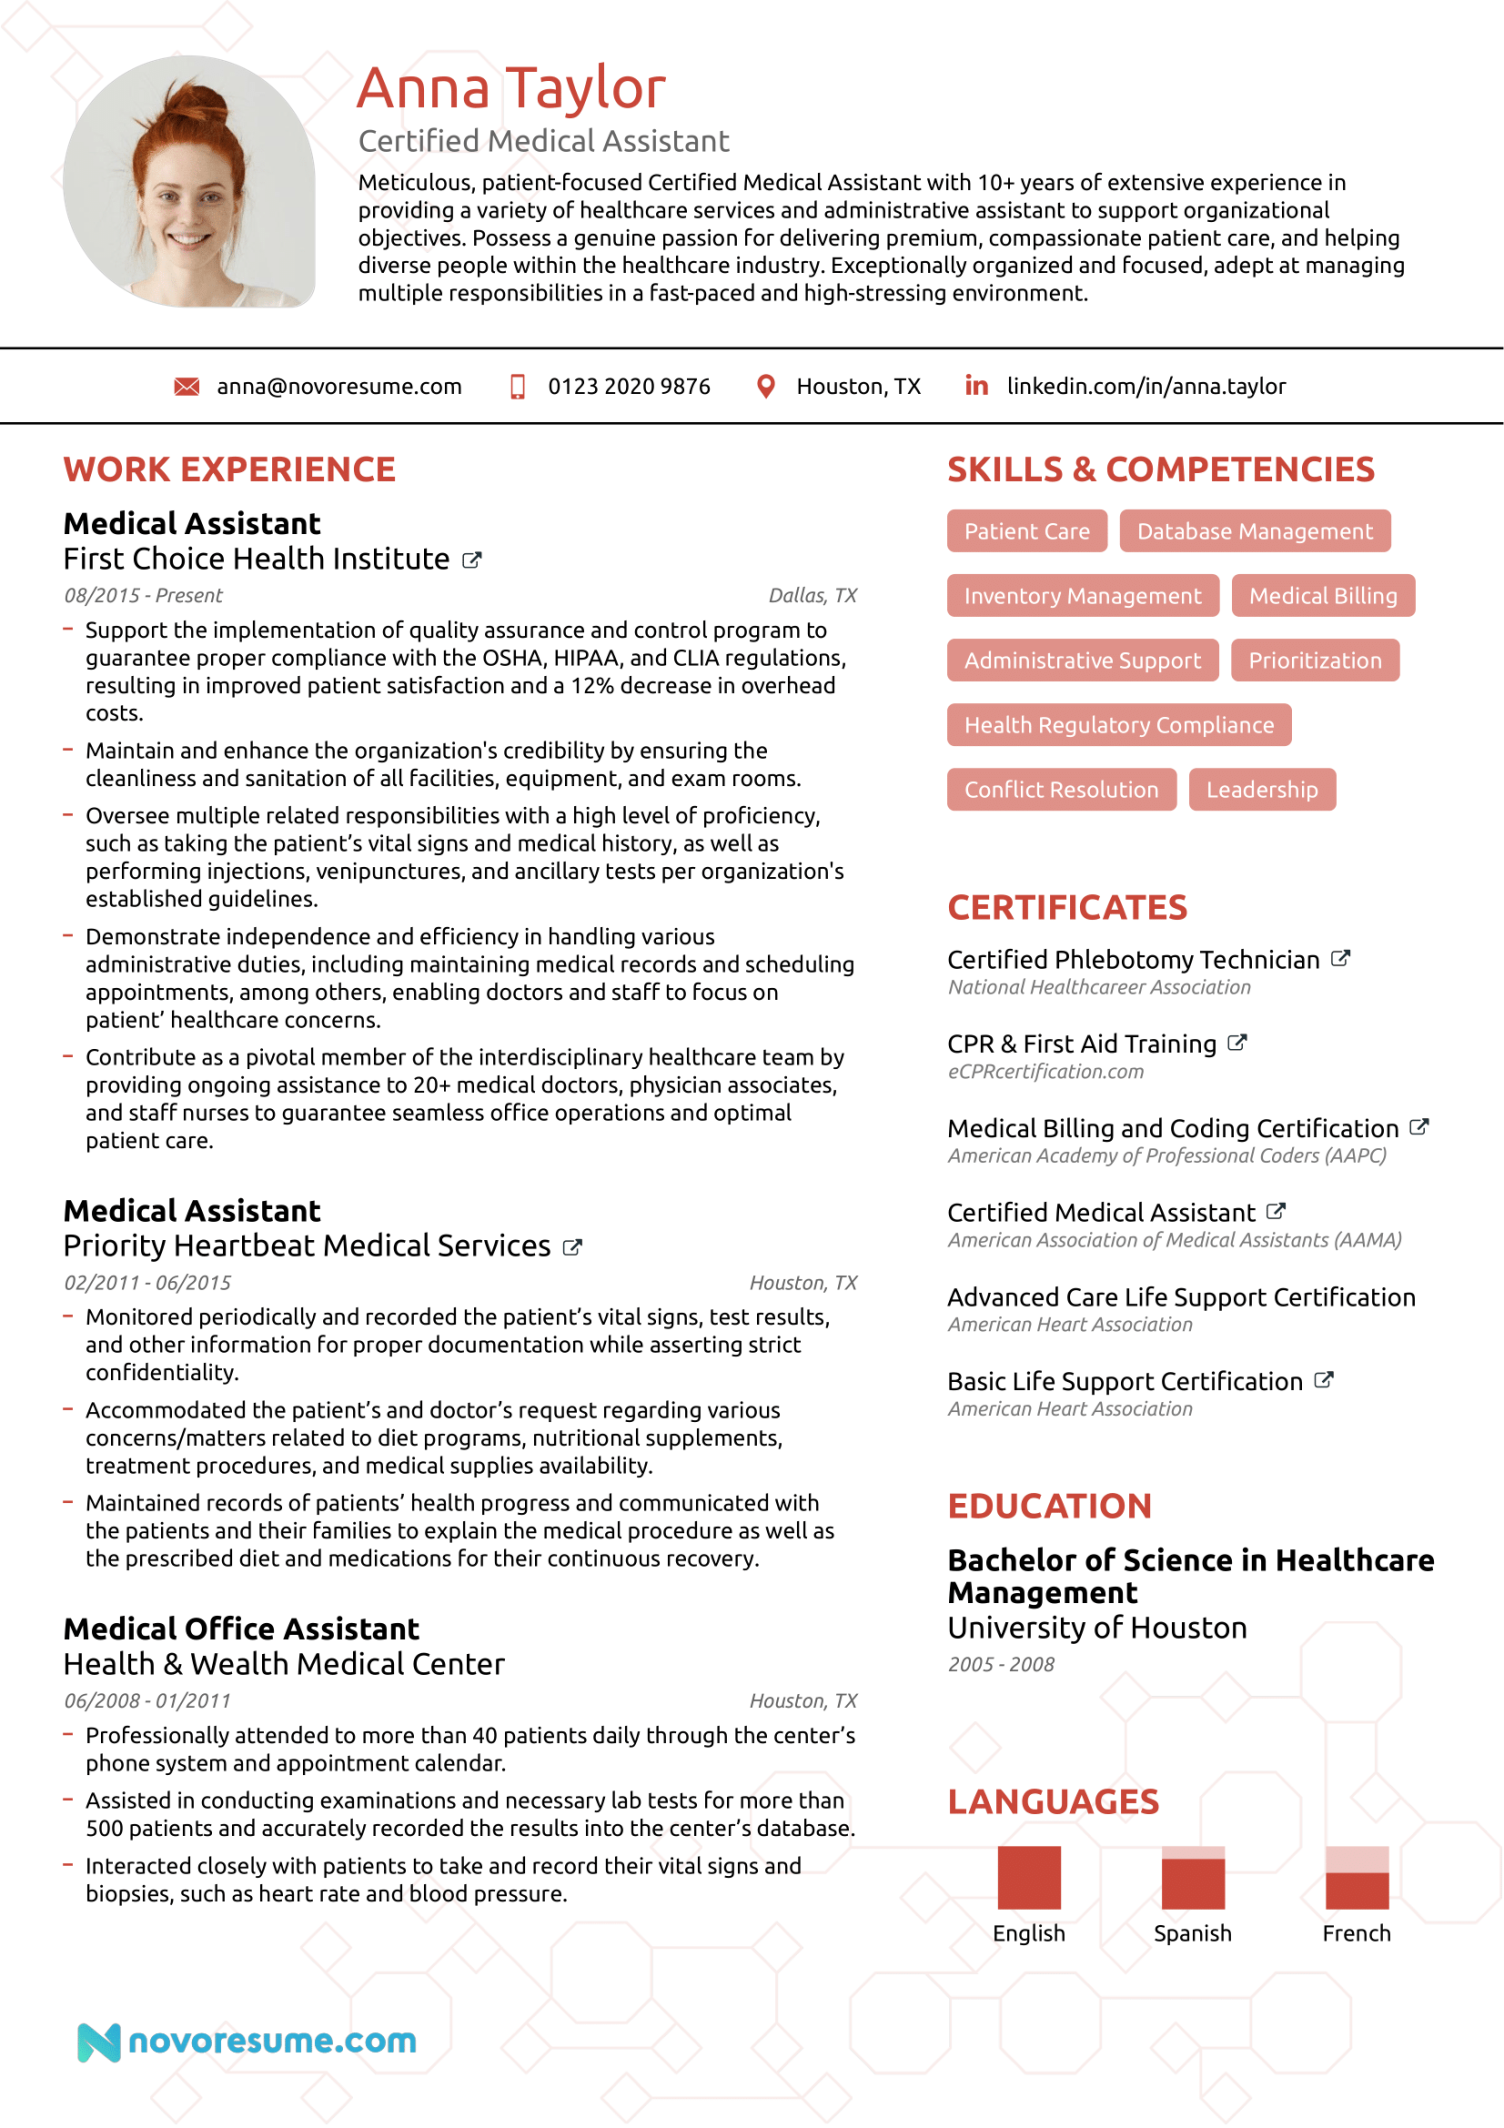 Medical Assistant Resume - Examples & Guide for